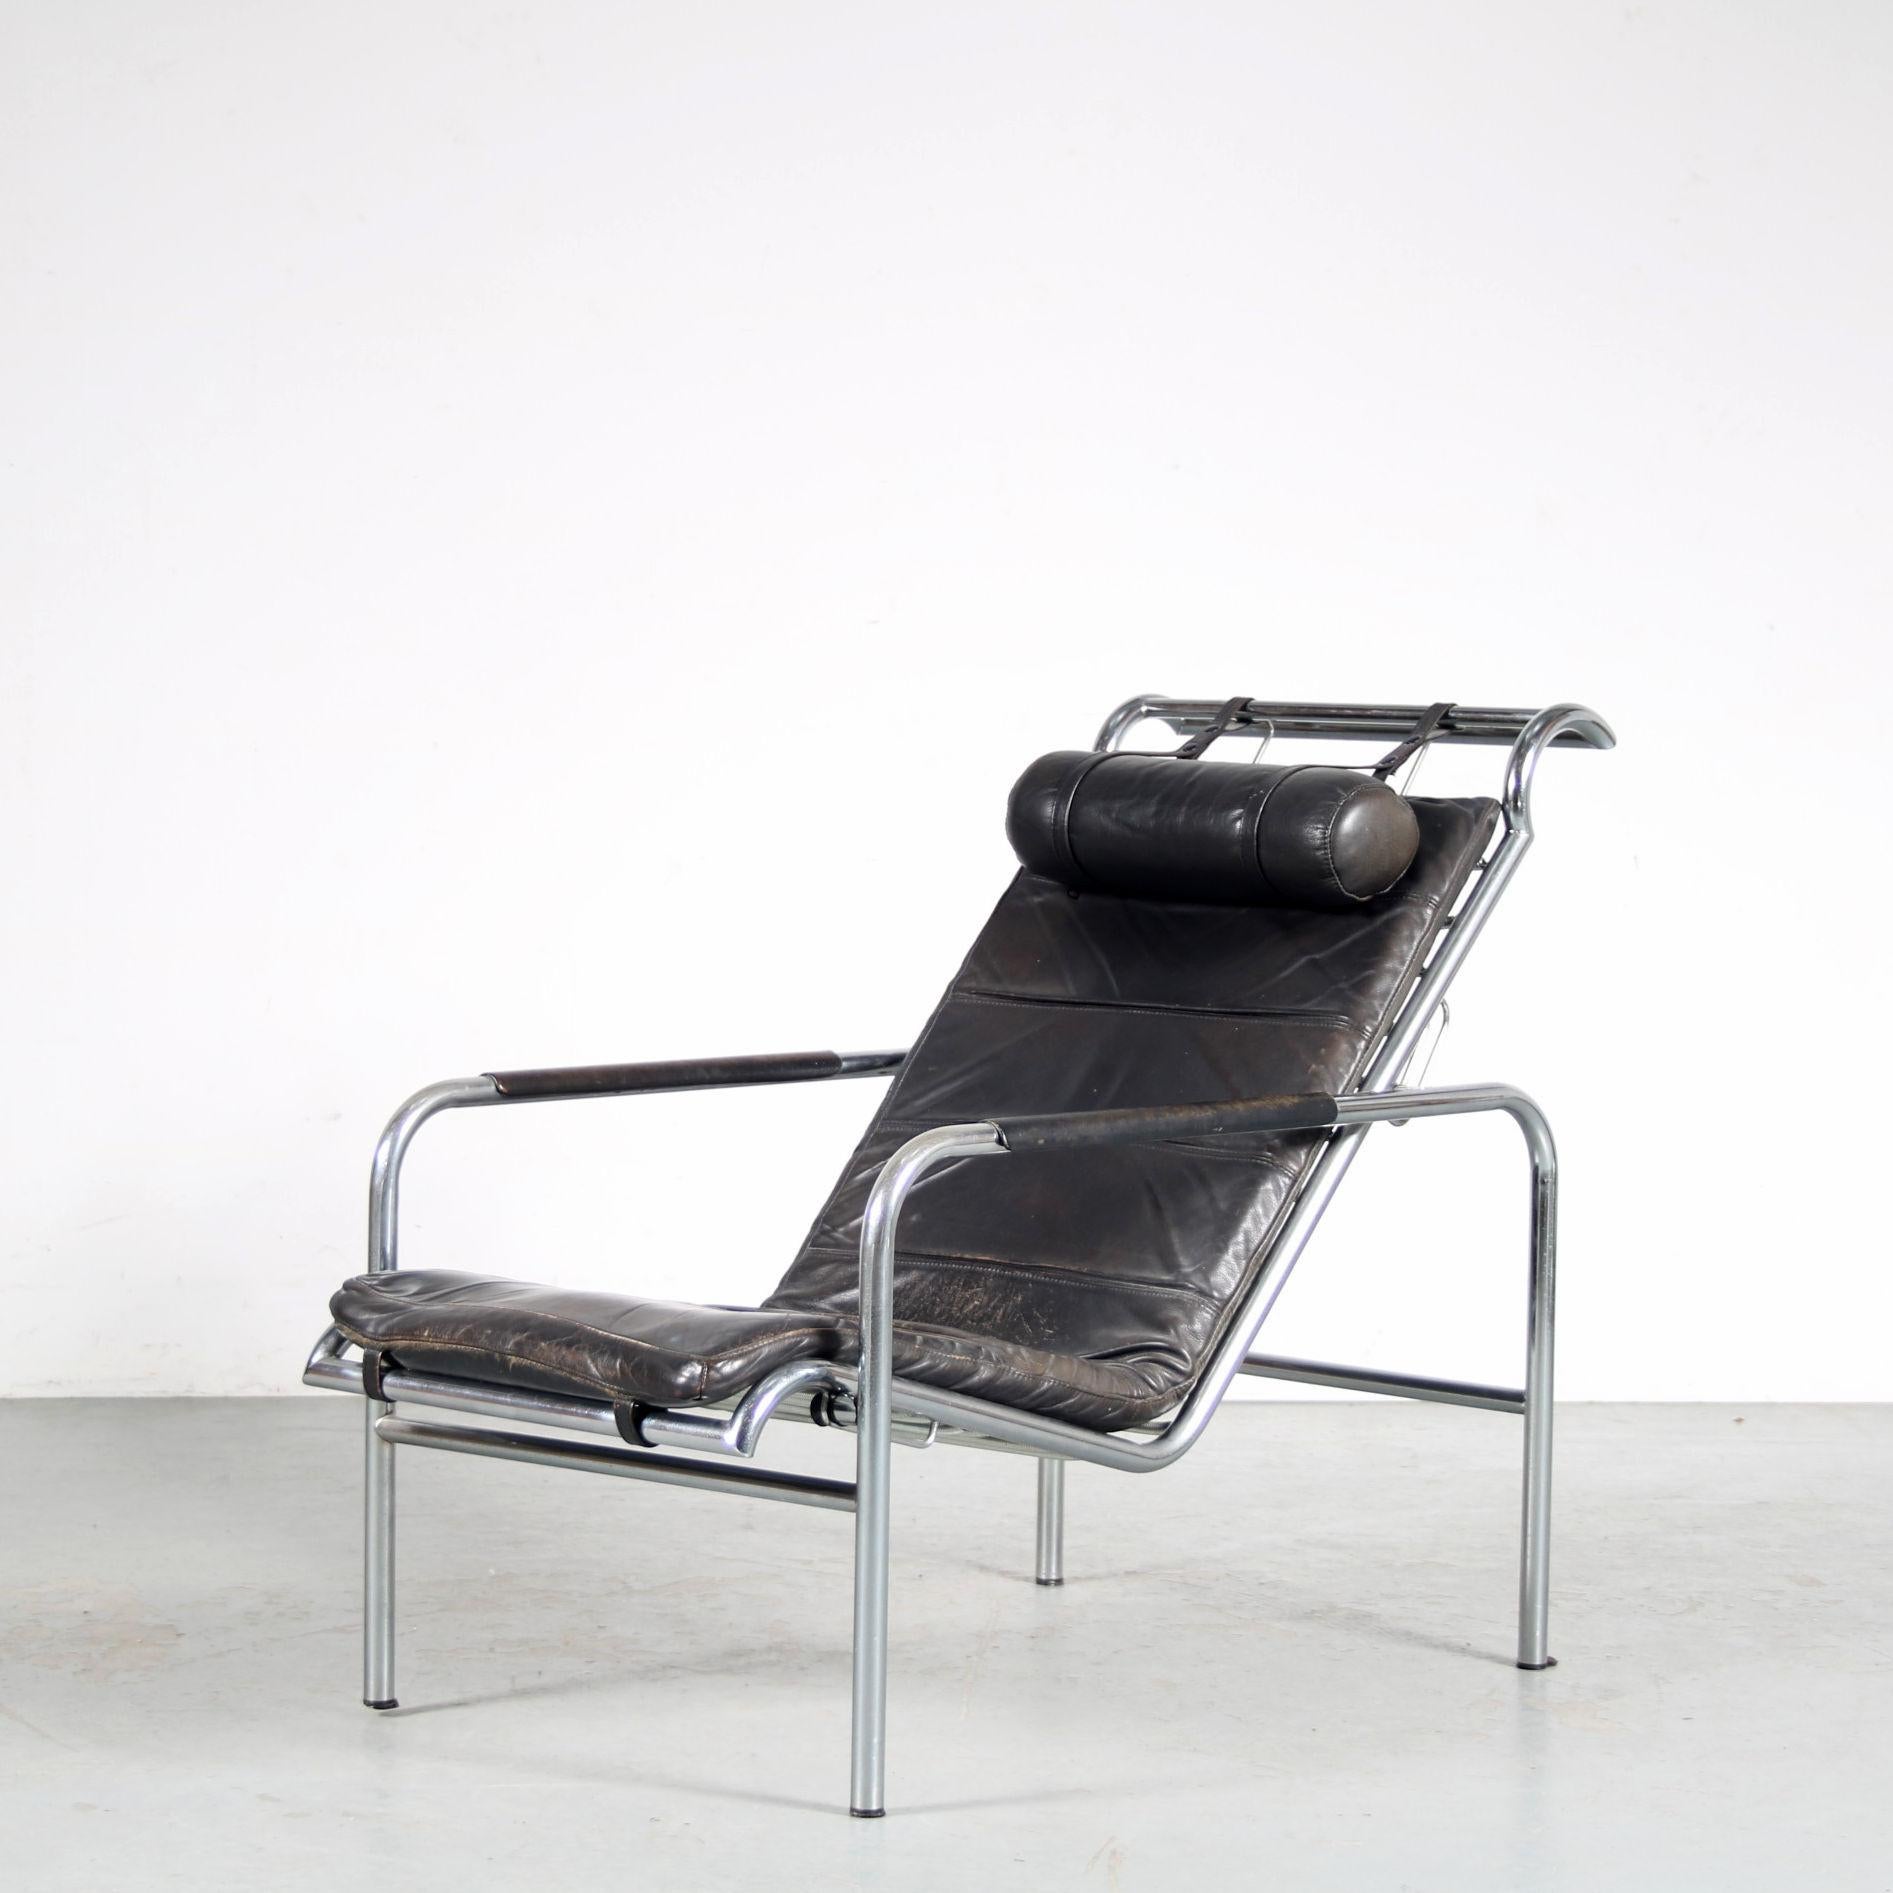 A beautiful 1980s edition of the 1930s “Genni” chair, designed by Gabriele Mucchi and manufactured by Zanotta in Italy.

This impressive lounge chair has a unique style, made of tubular chrome plated metal bent into rectangular shapes with rounded